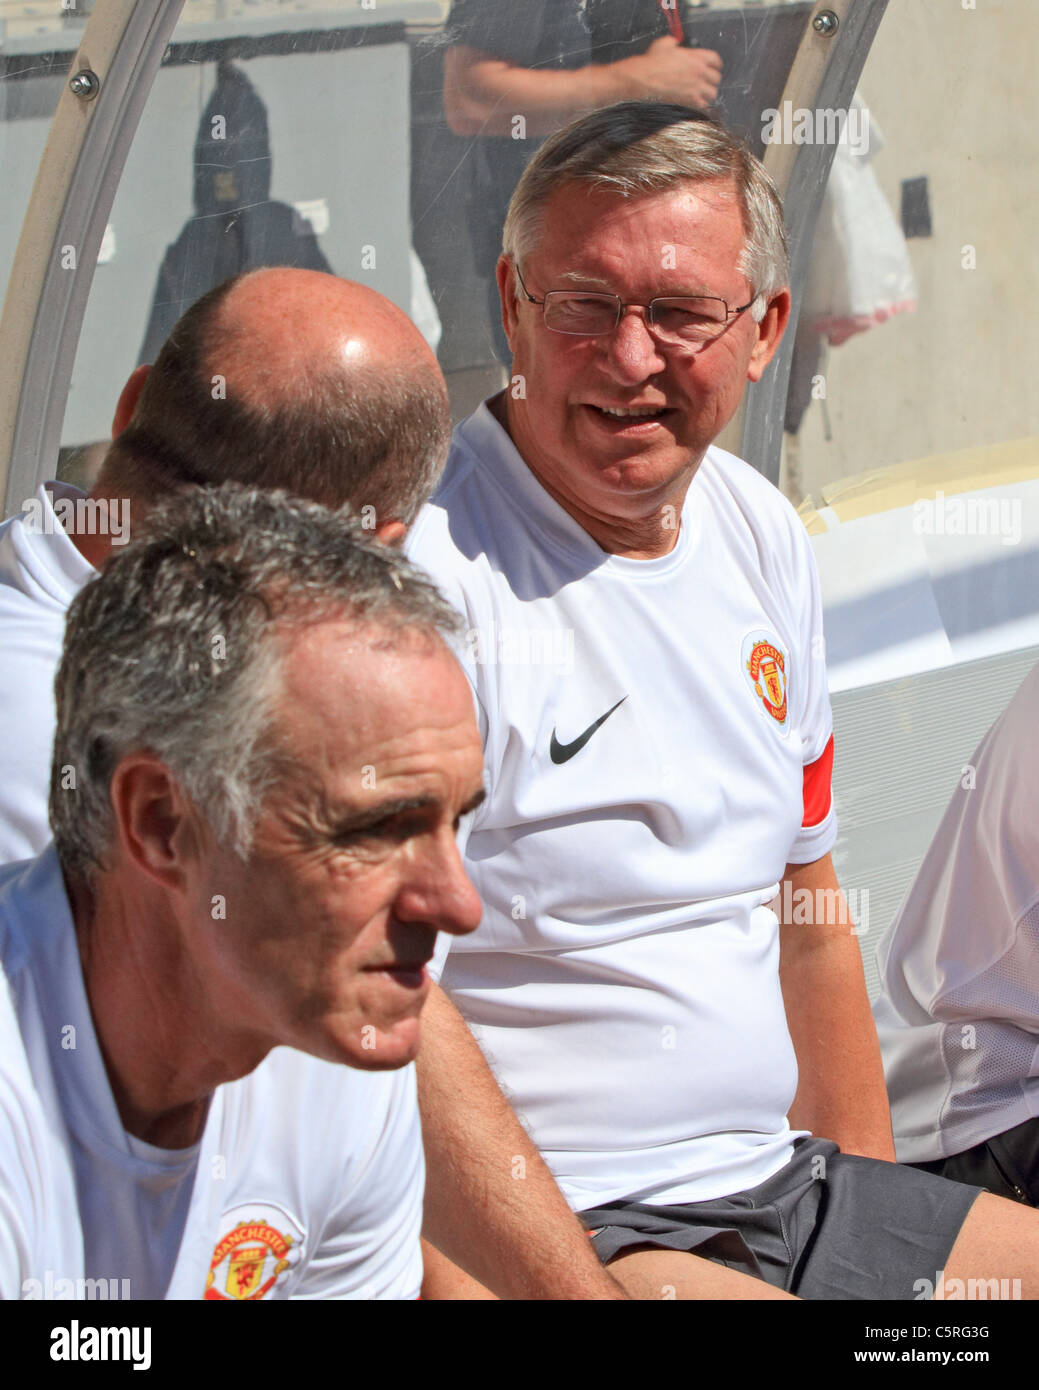 Manchester United manager, Sir Alex Ferguson (R), chats with his coaches on the bench, vs. the Chicago Fire, at Soldier Field. Stock Photo